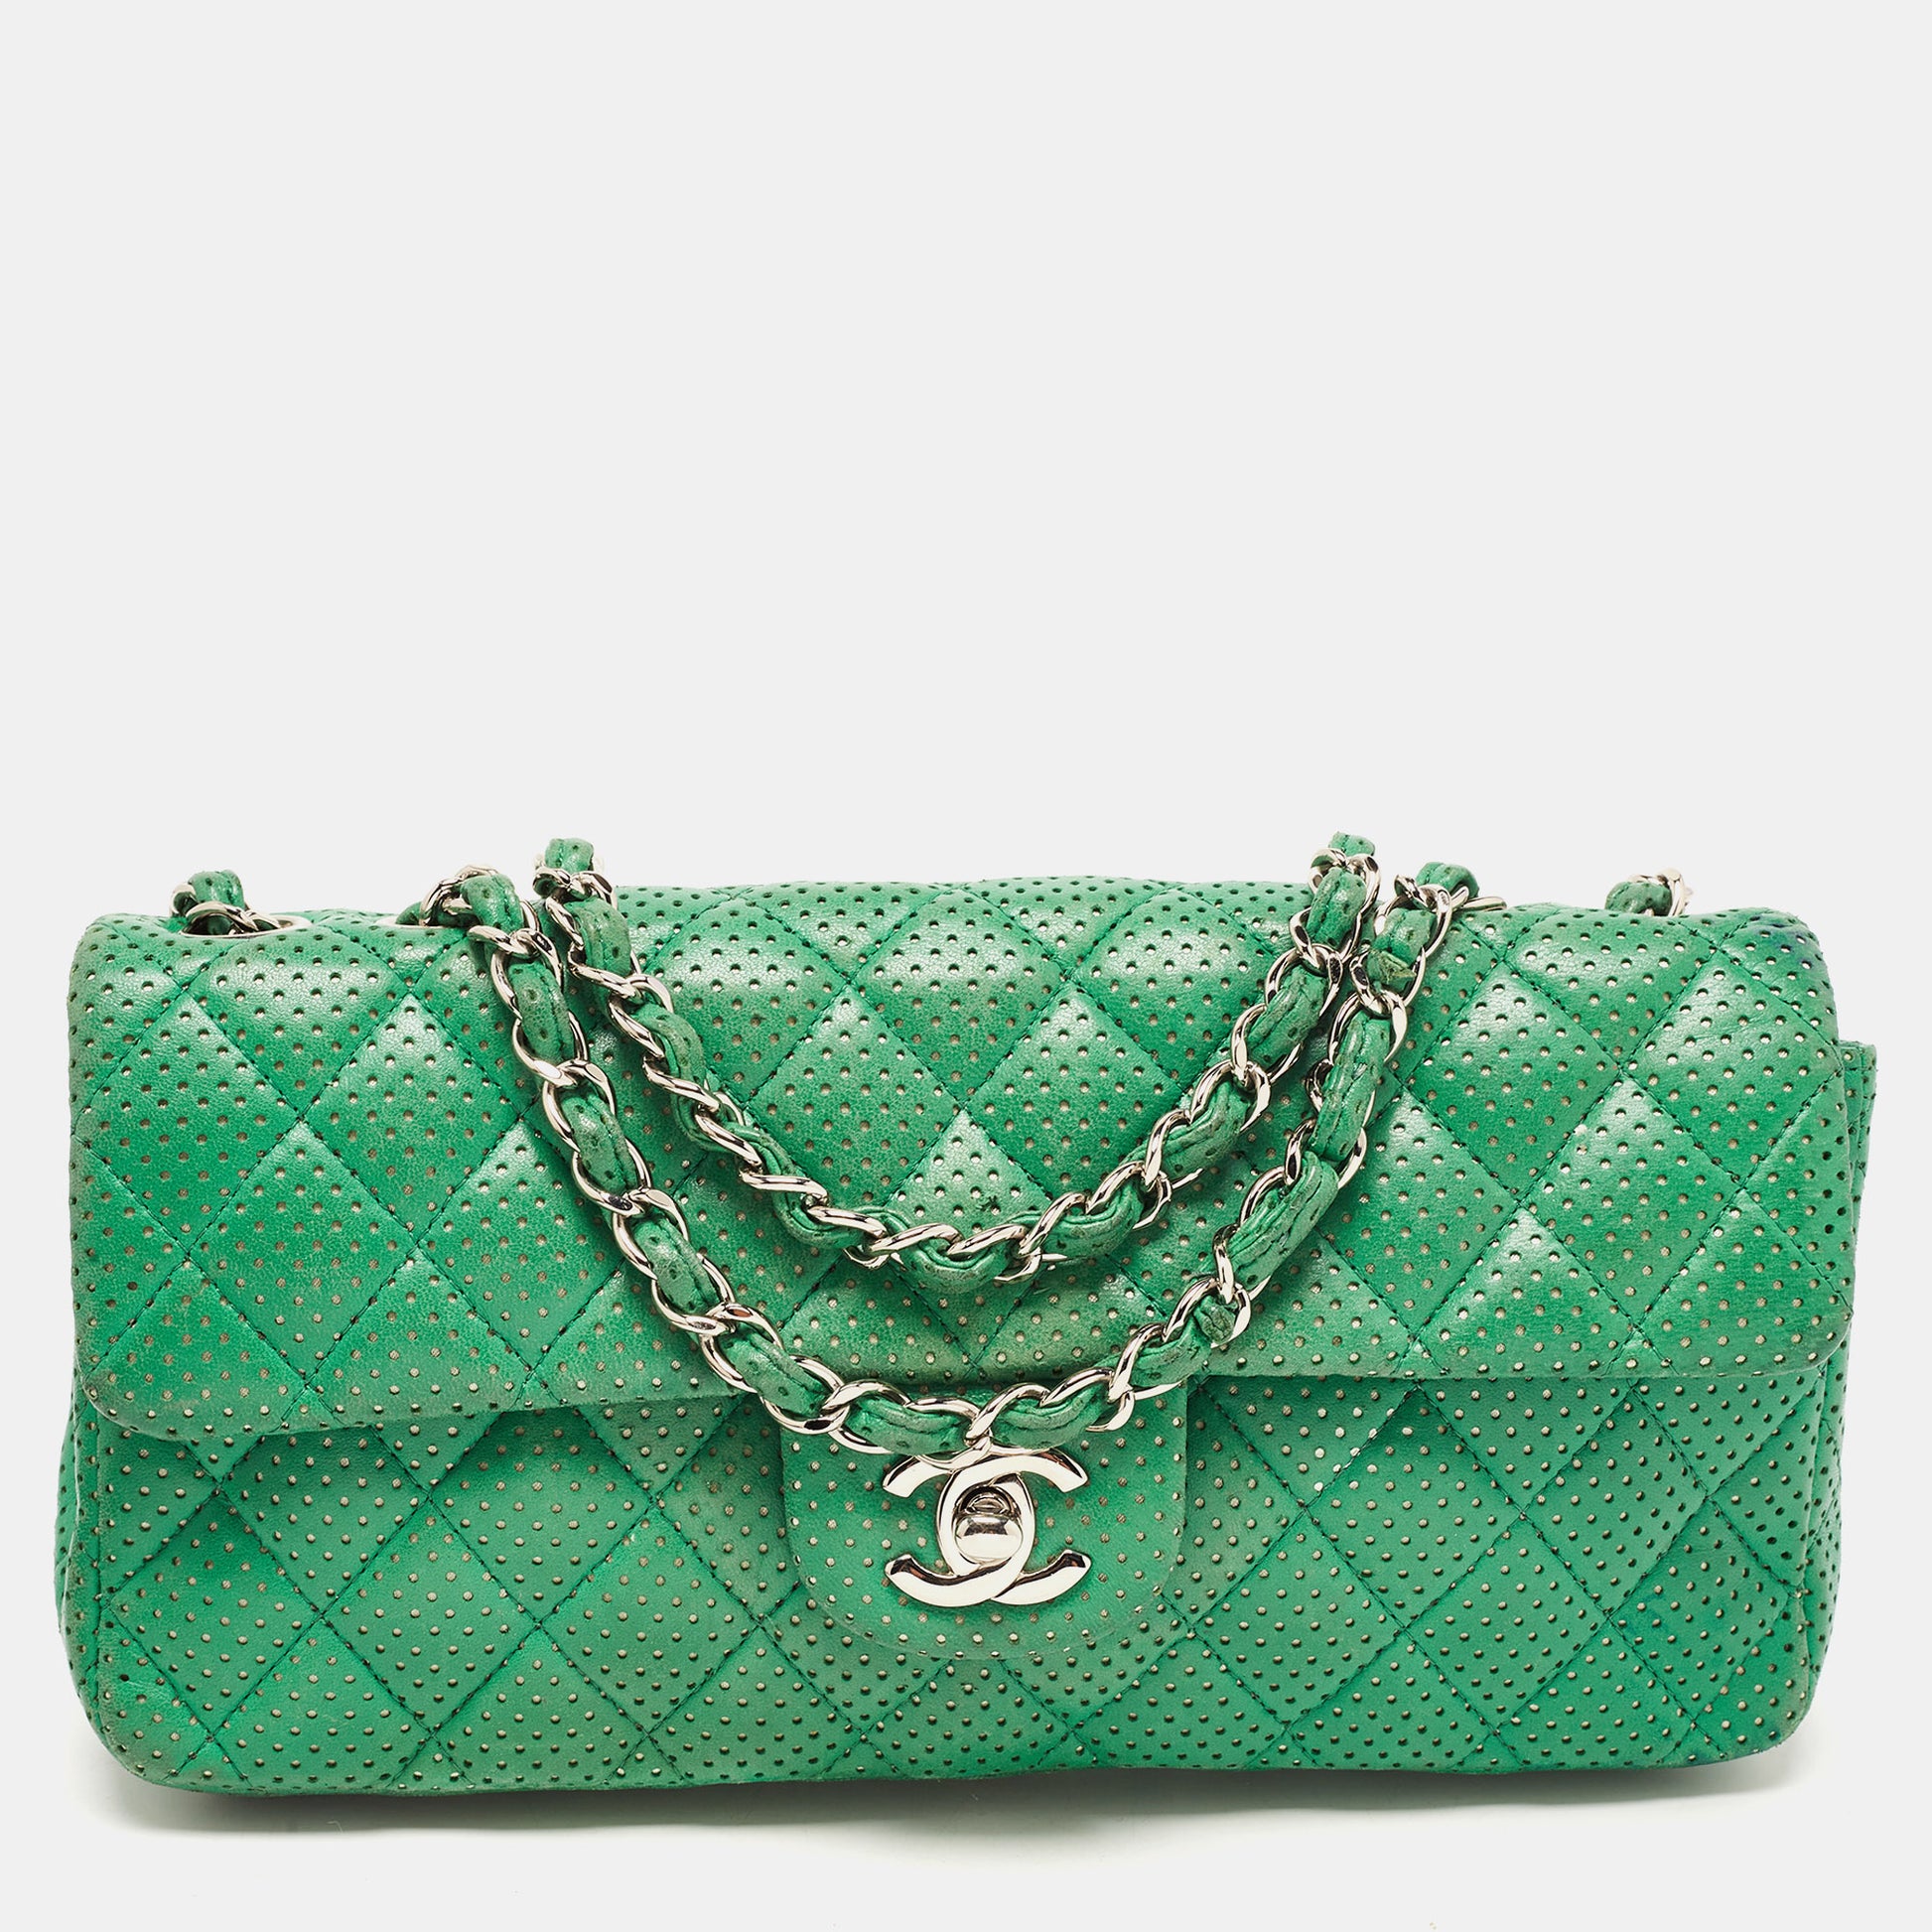 Chanel Classic Single Flap Bag Quilted Crinkled Patent East West